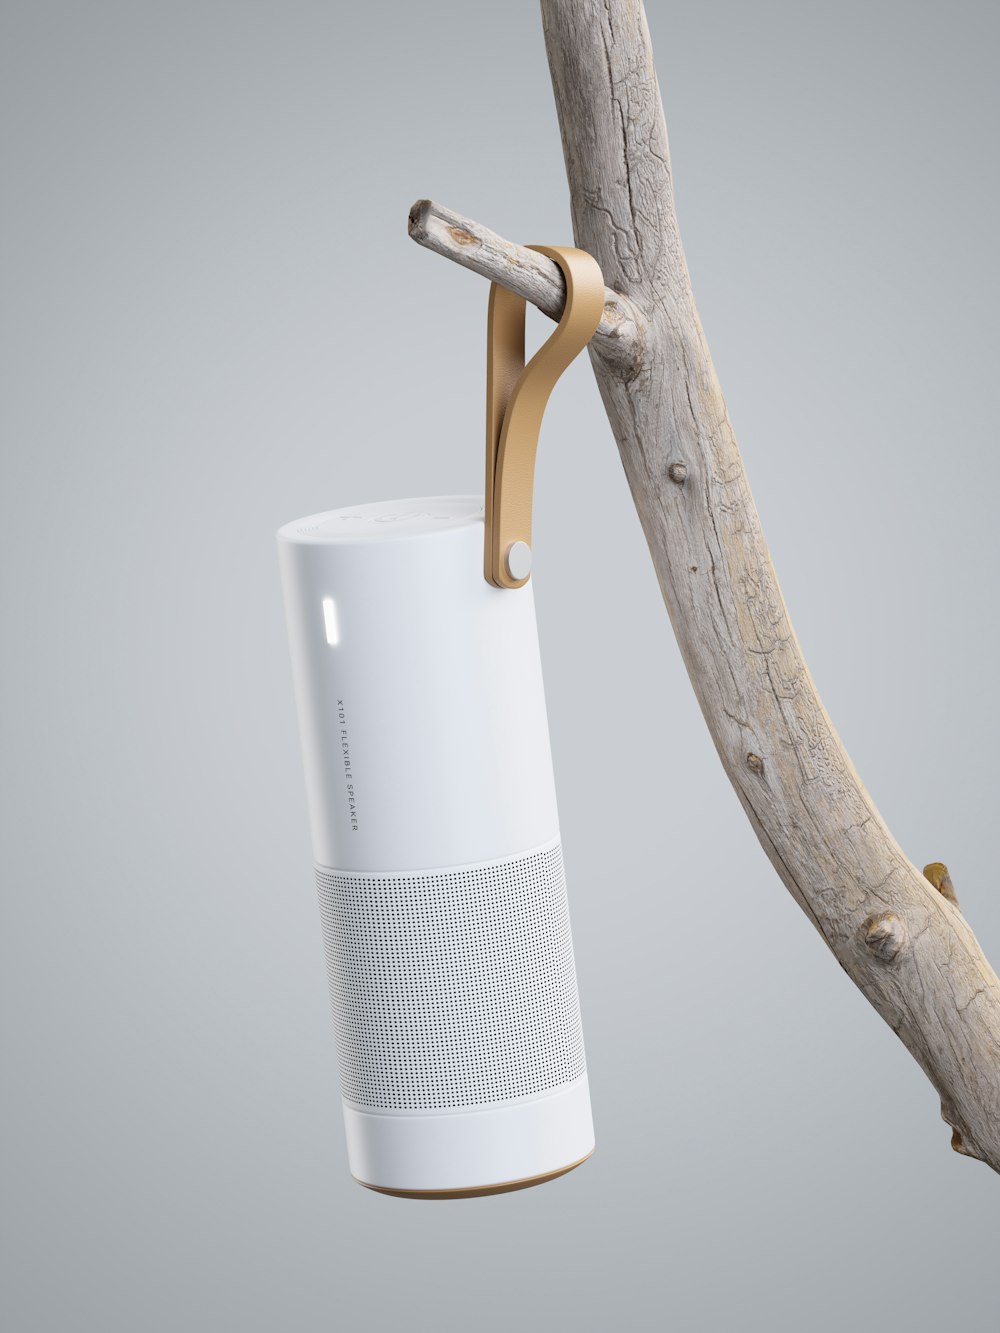 a white smart speaker hanging from a tree branch